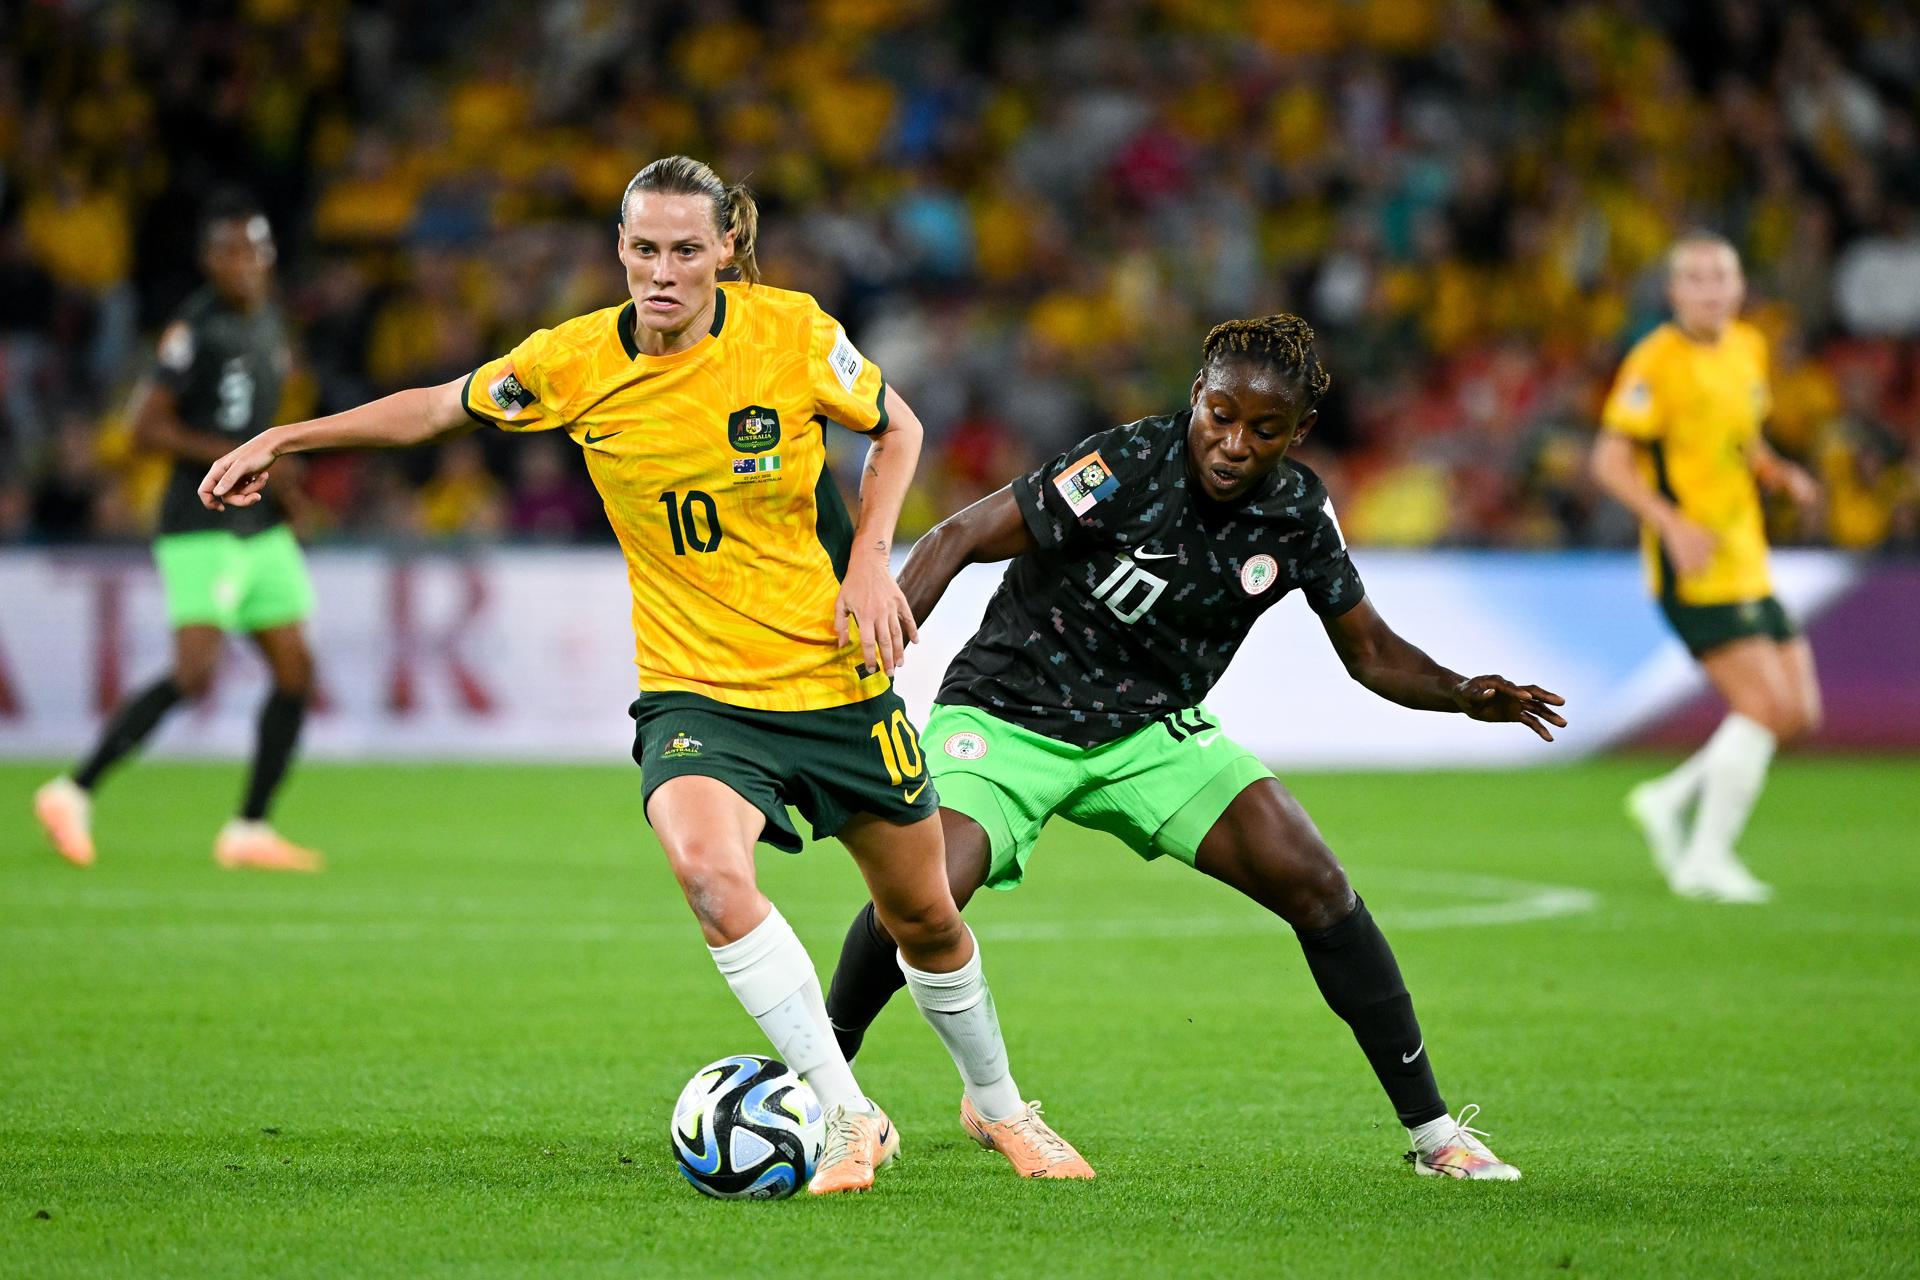 Australia's Emily van Egmond (L) battles Christy Ucheibe of Nigeria during the FIFA Women's World Cup 2023 Group B match in Brisbane, Australia. EFE/EPA/DARREN ENGLAND AUSTRALIA AND NEW ZEALAND OUT EDITORIAL USE ONLY
